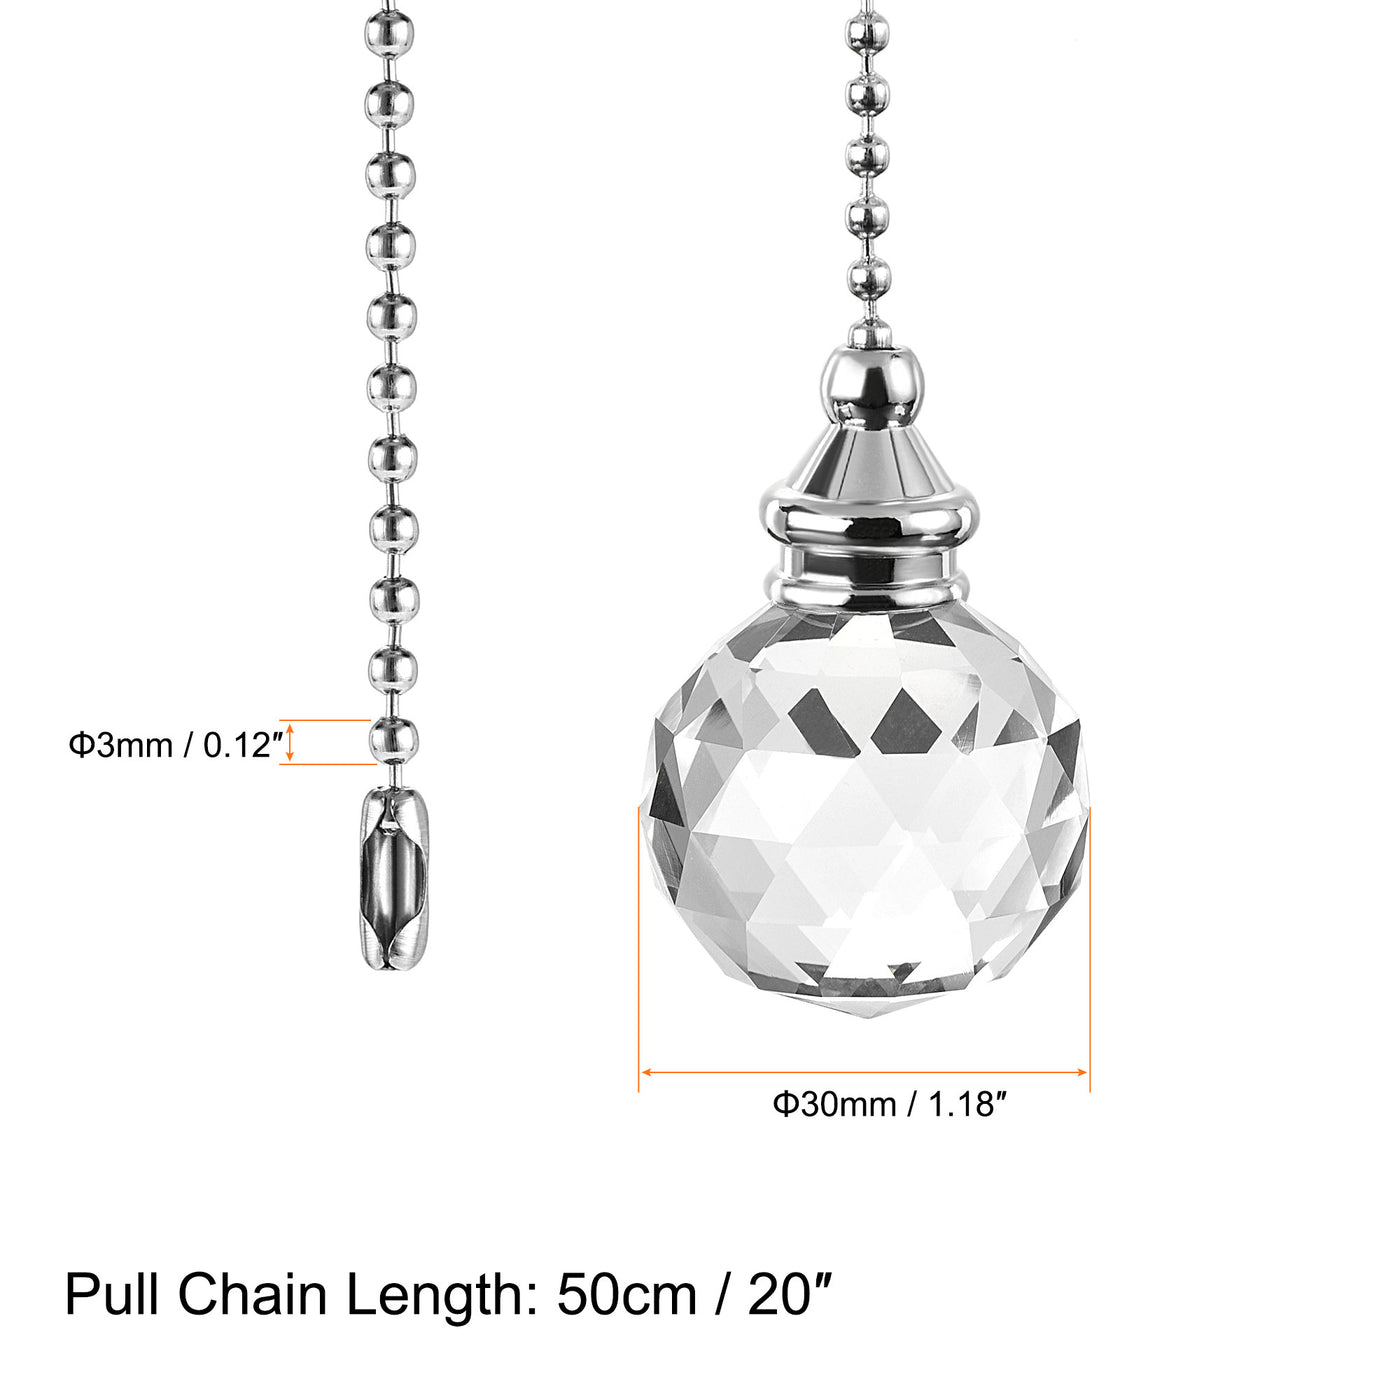 uxcell Uxcell Ceiling Fan Pull Chain, 20 Inch Nickel Finish Chain Ornament Extension, 30mm Clear Crystal Ball Pendant